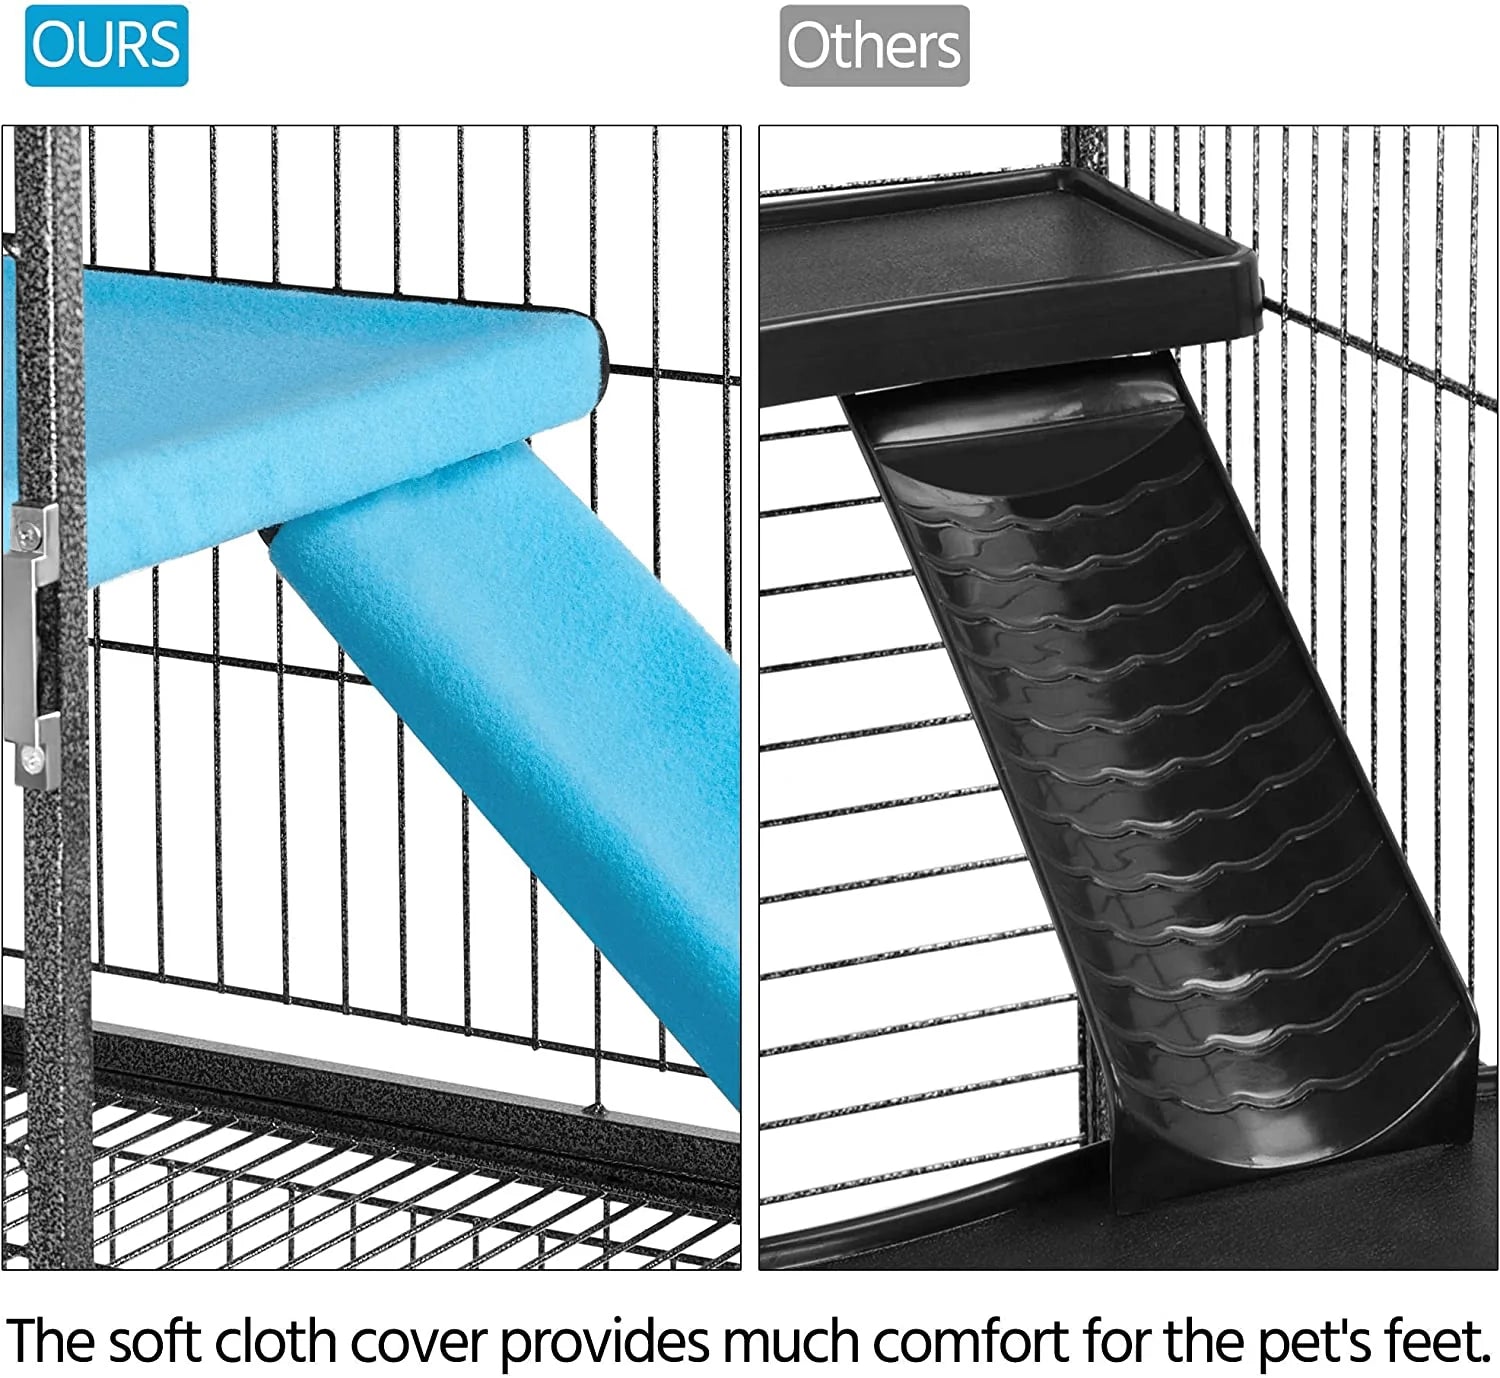 Yaheetech Rolling Single/Double-Story Ferret Cage Small Animal Cage for Chinchilla Adult Rats Metal Critter Nation Cage Black/White